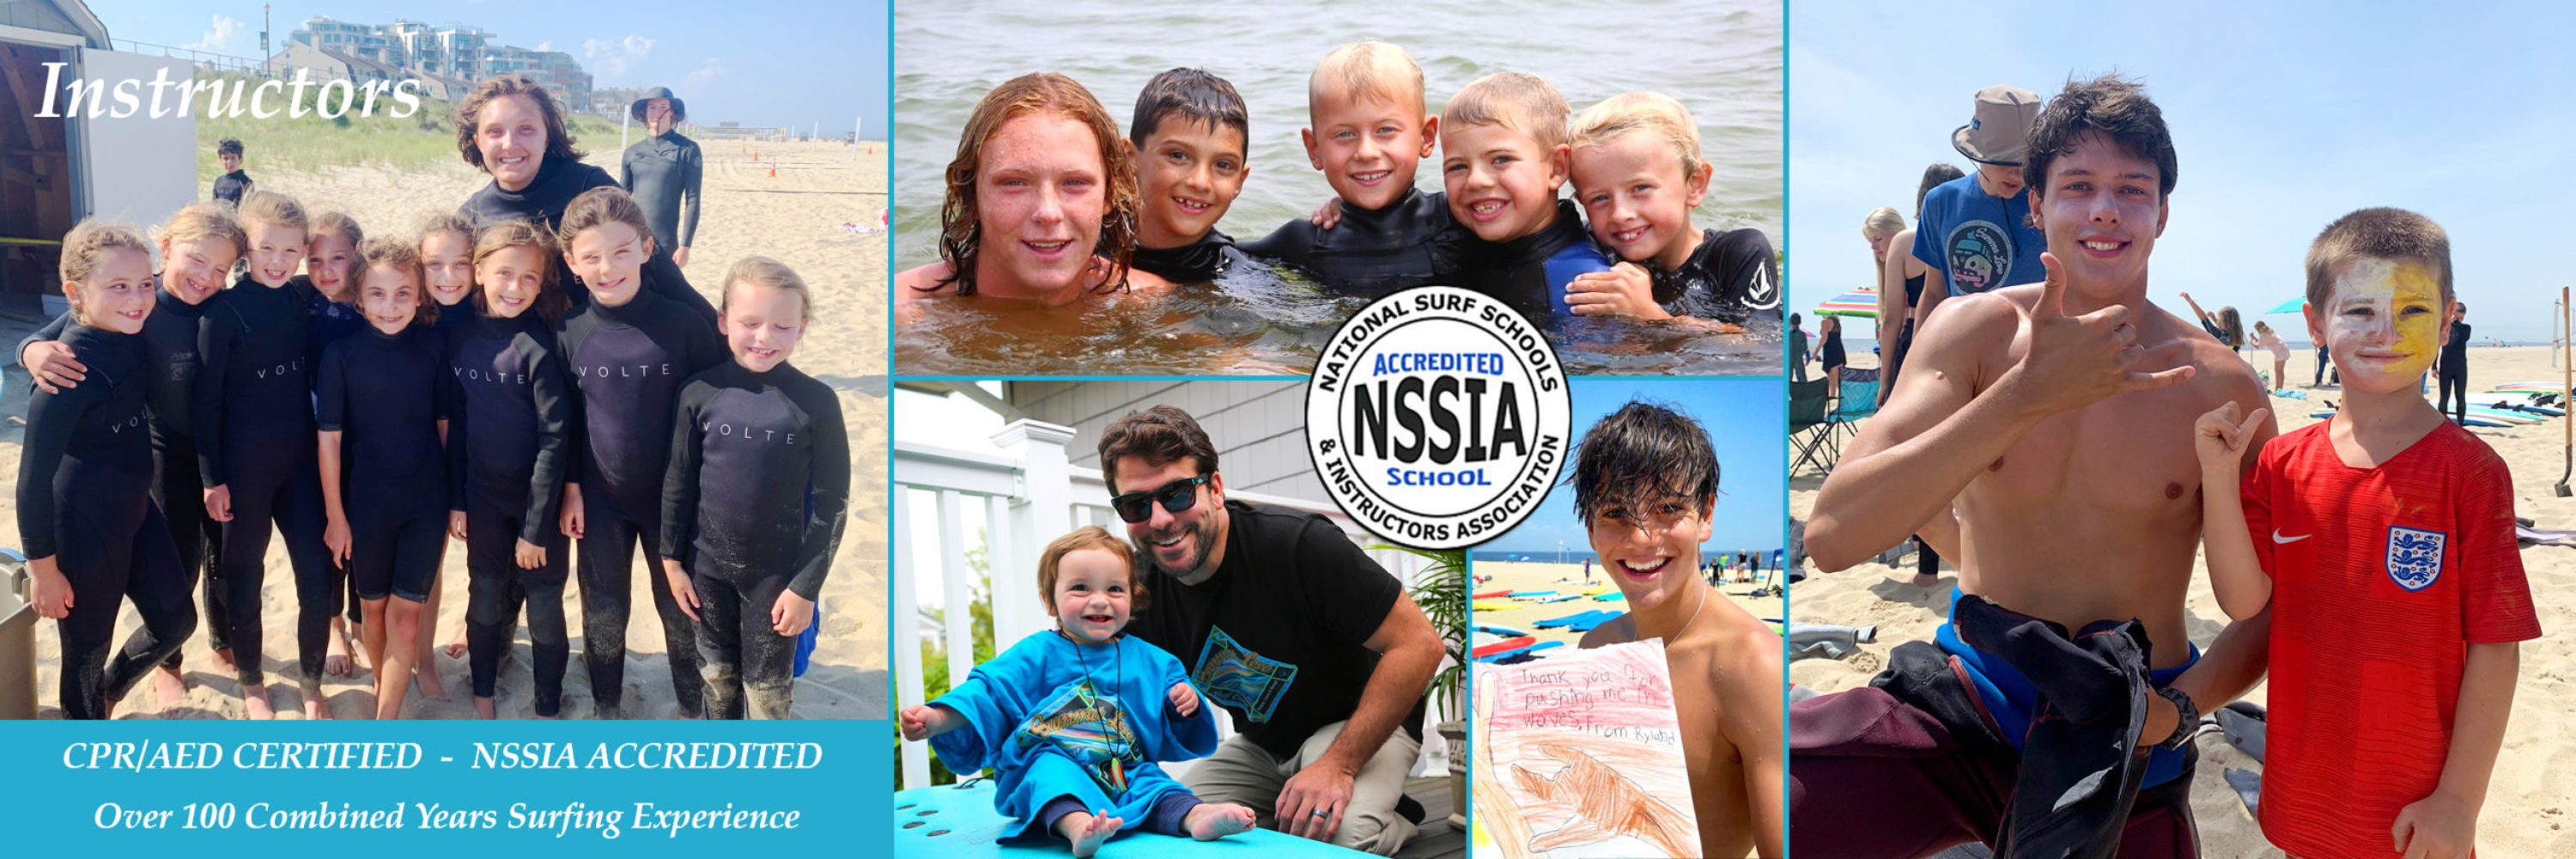 Surfing Instructors, Surf Camp Staff, NJ Surf Instructor, NSSIA Accredited, CPR Certified